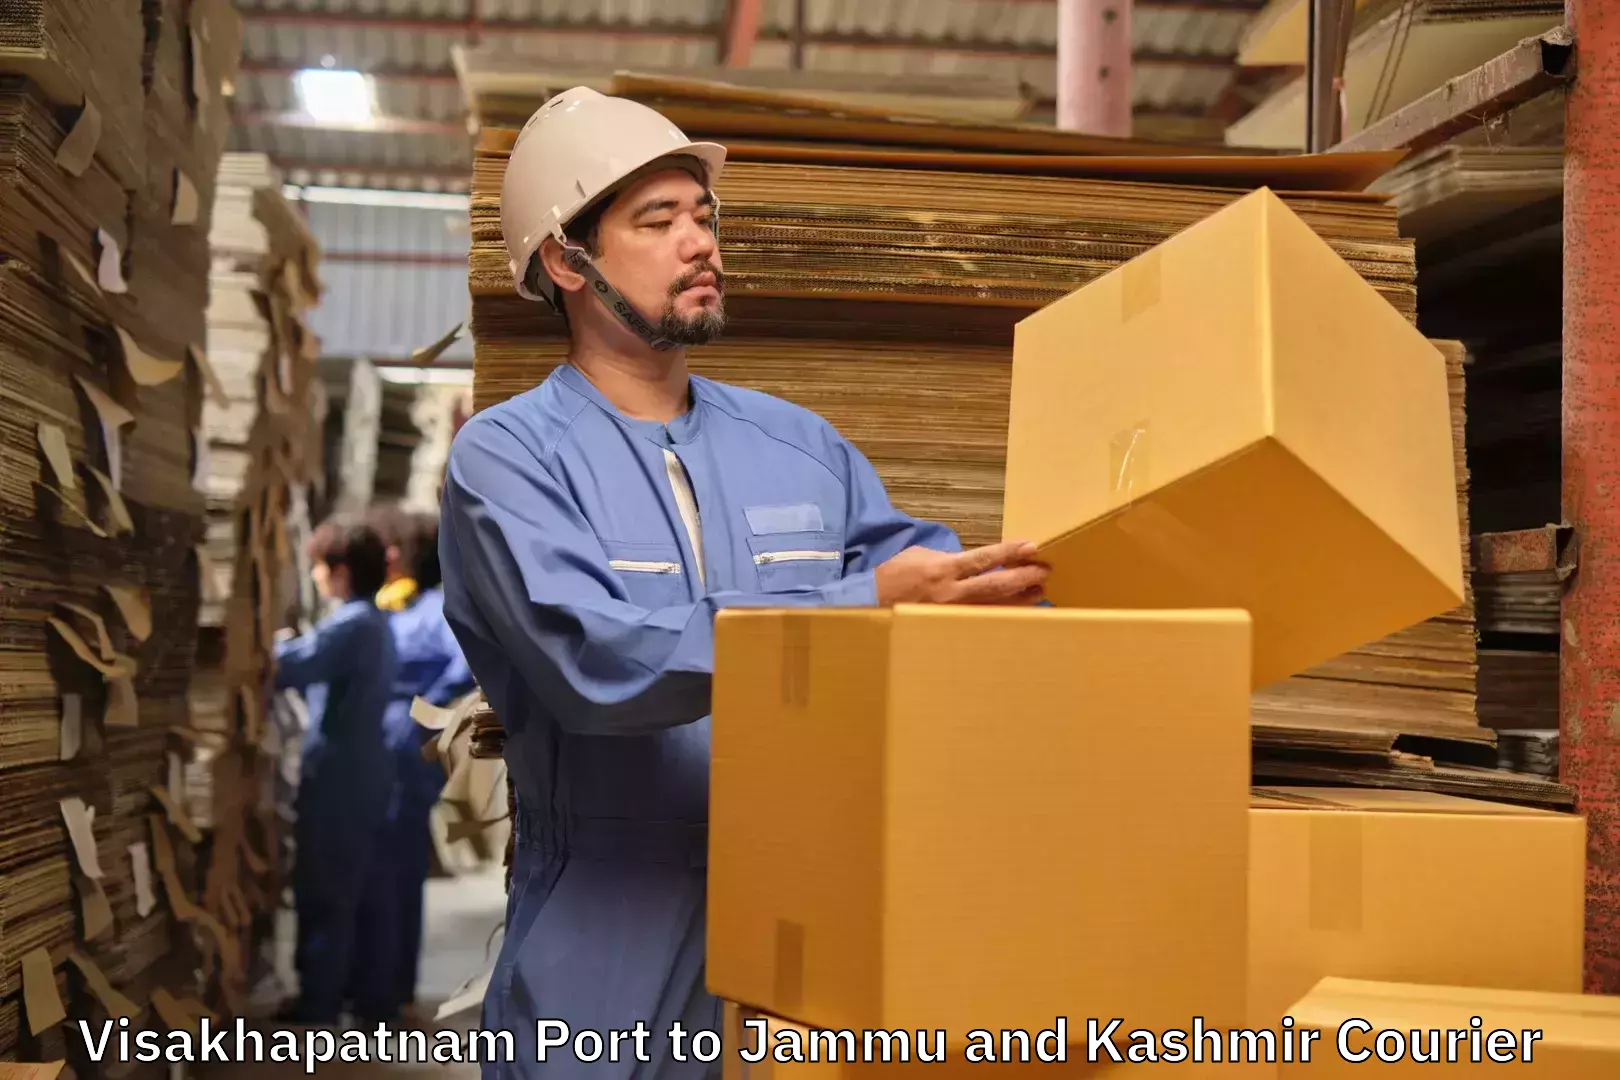 Express baggage shipping in Visakhapatnam Port to Sopore